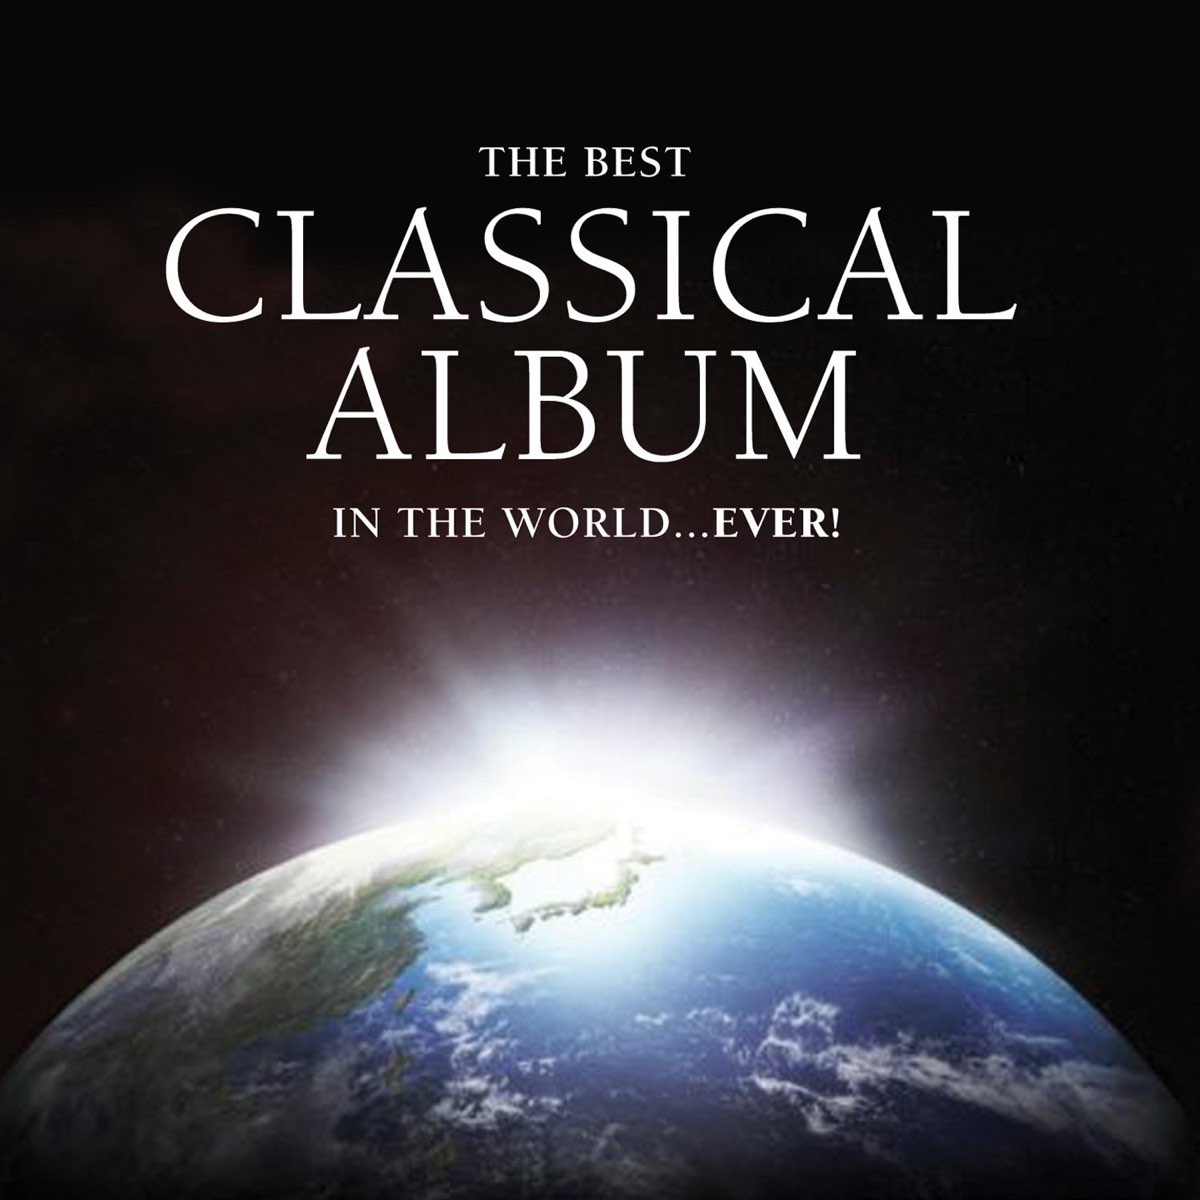 ‎The Best Classical Album in the World...Ever! by Various Artists on